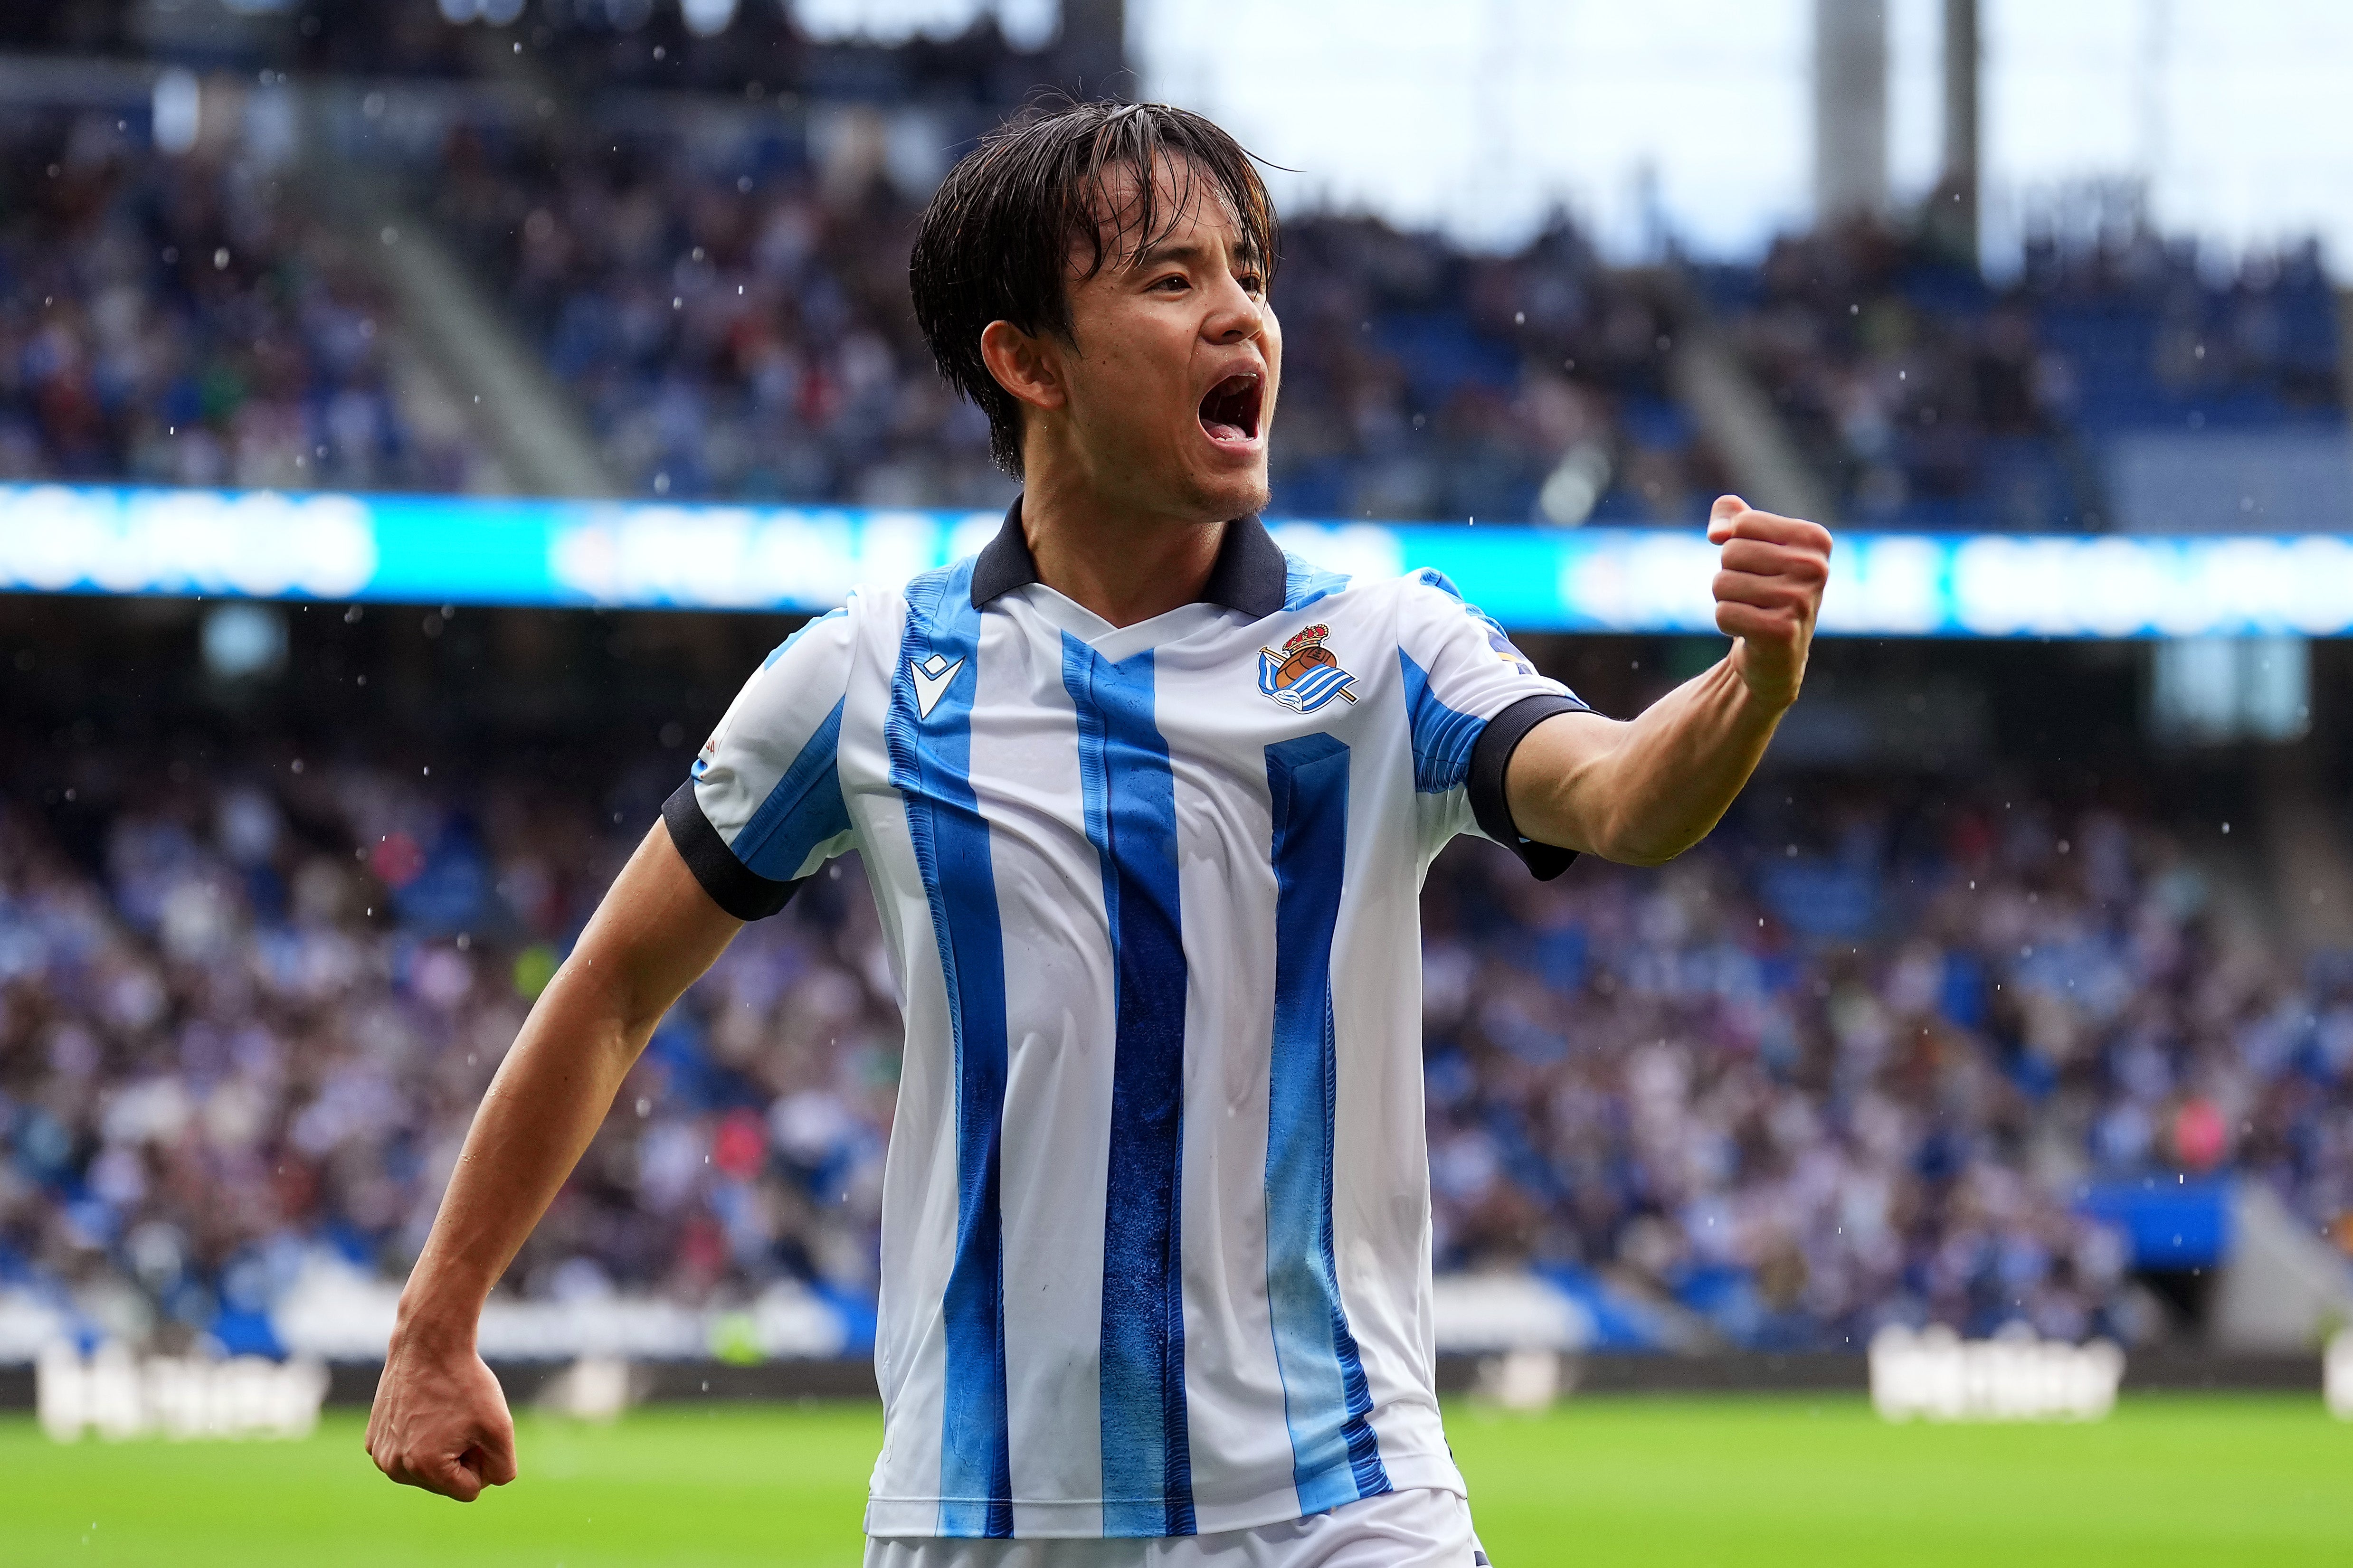 LaLiga star Takefusa Kubo targets Champions League progress after superb  start for Real Sociedad | The Independent